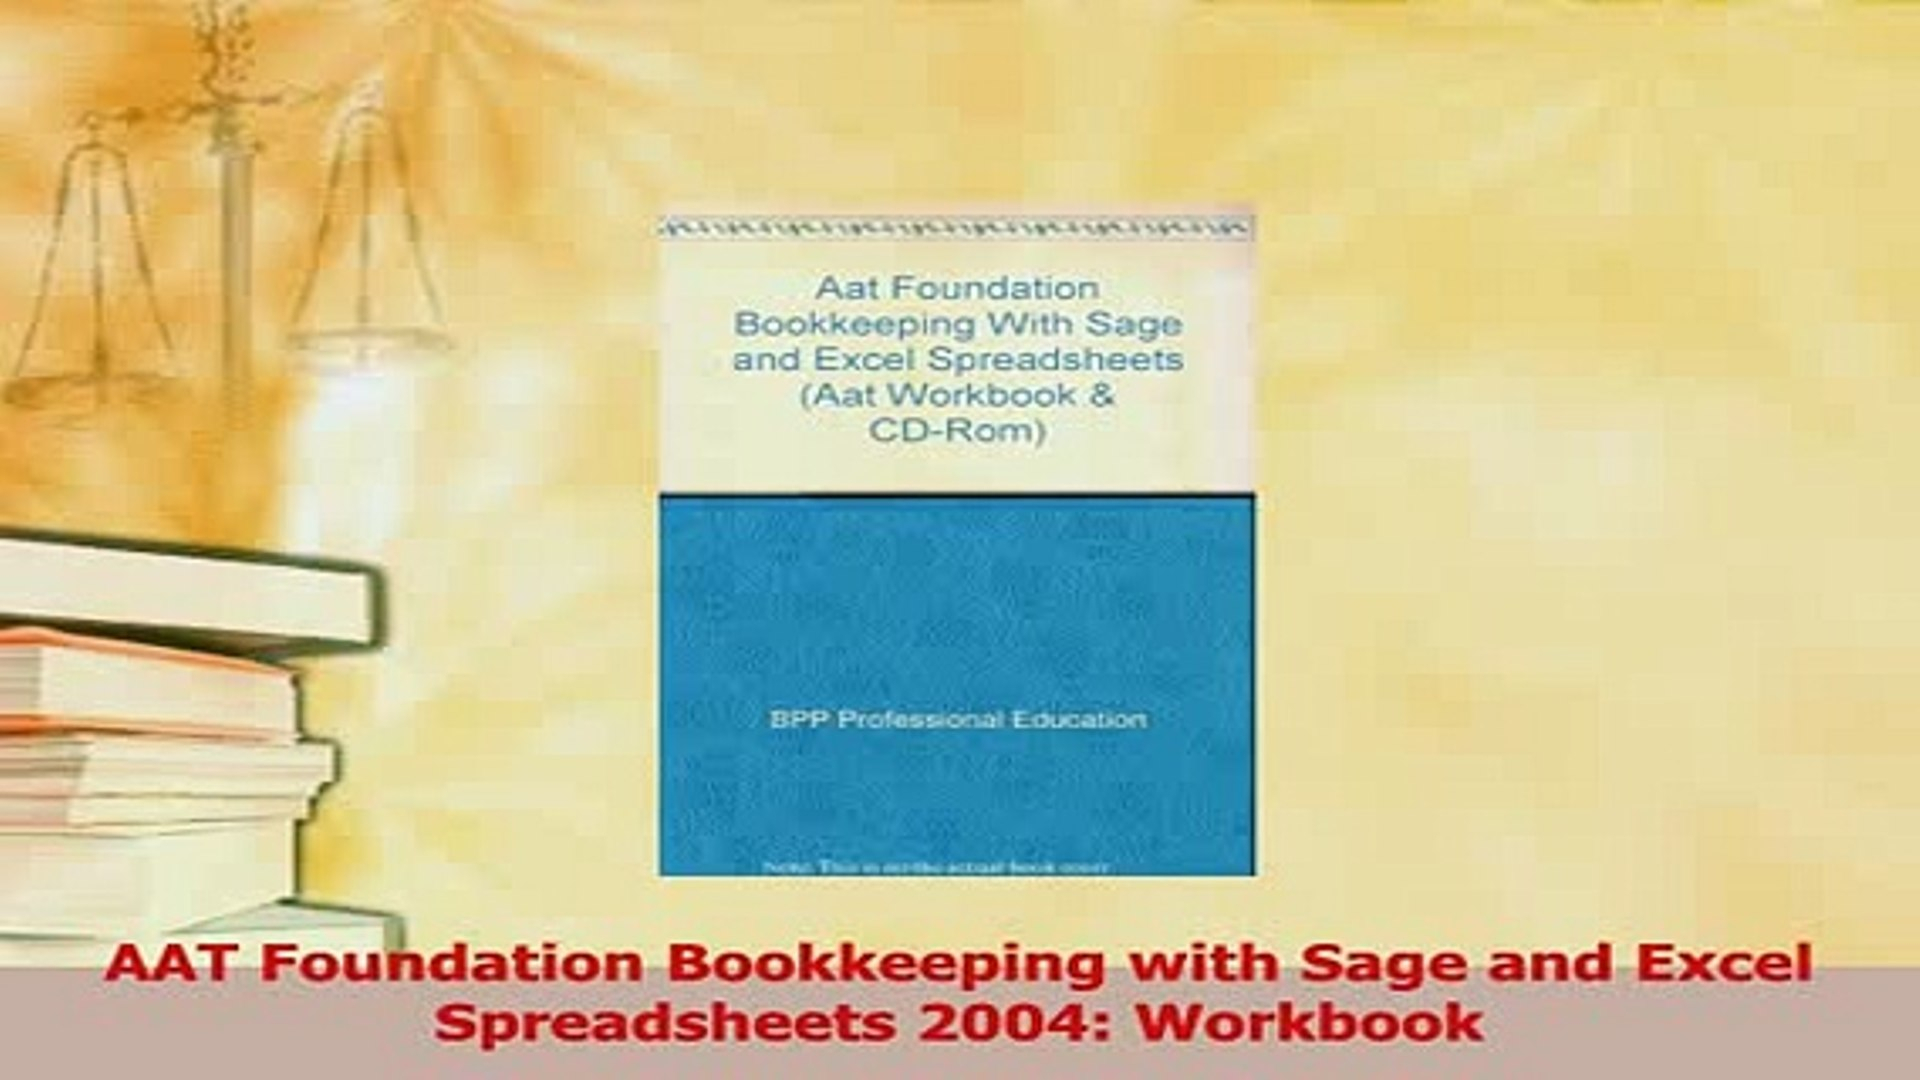 Bpp Aat Spreadsheets Regarding Download Aat Foundation Bookkeeping With Sage And Excel Spreadsheets